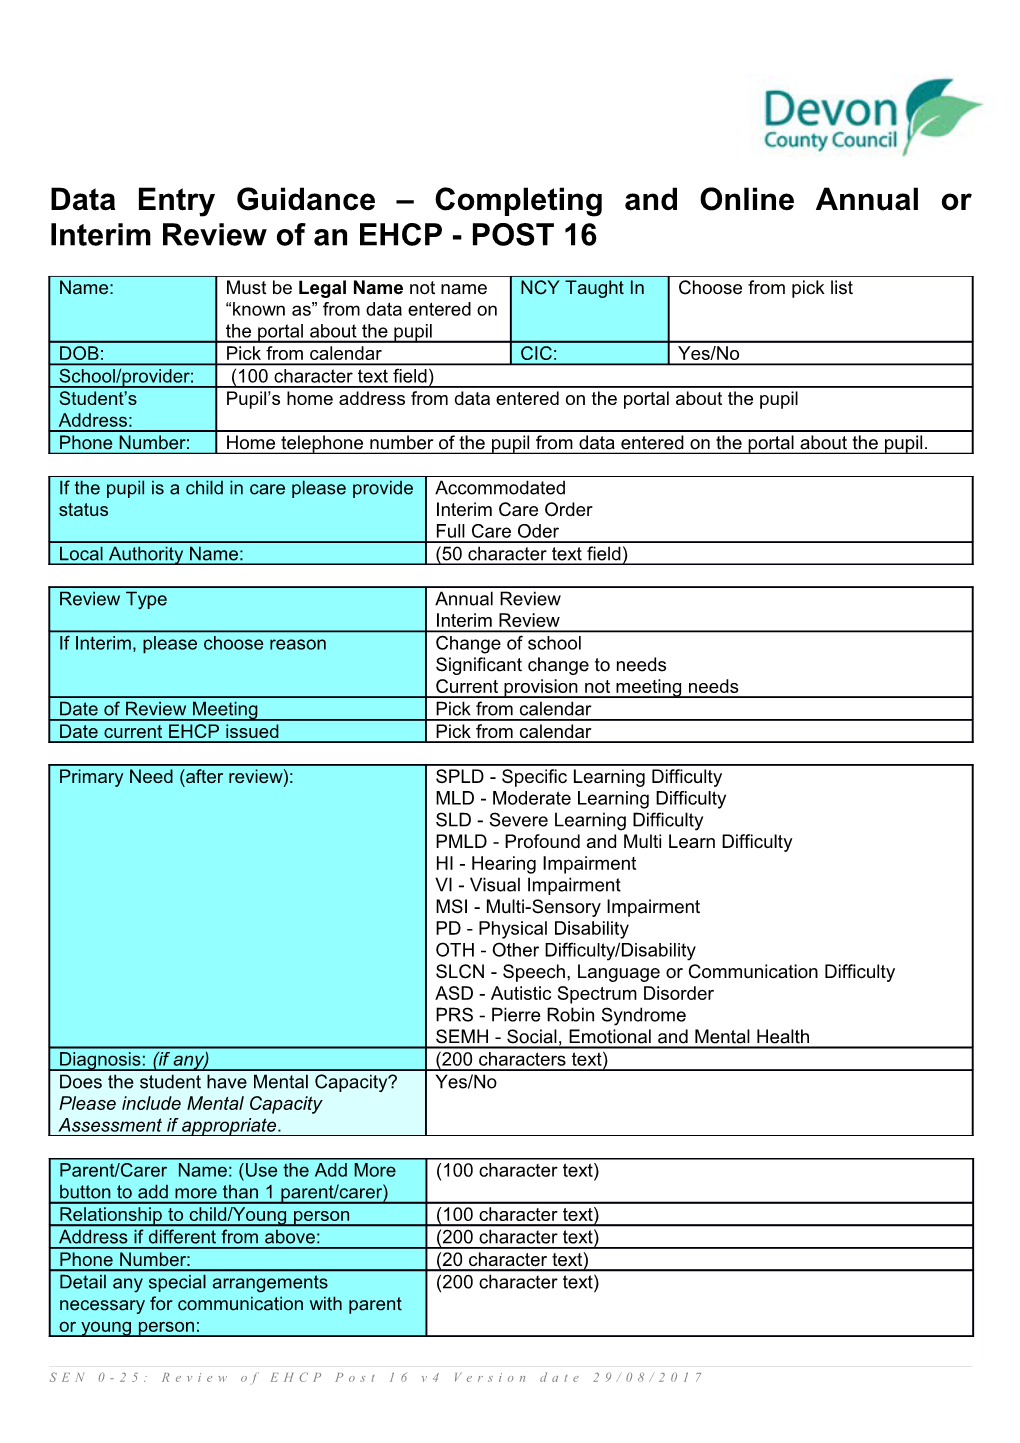 Data Entry Guidance Completing and Online Annual Or Interim Review of an EHCP - POST 16